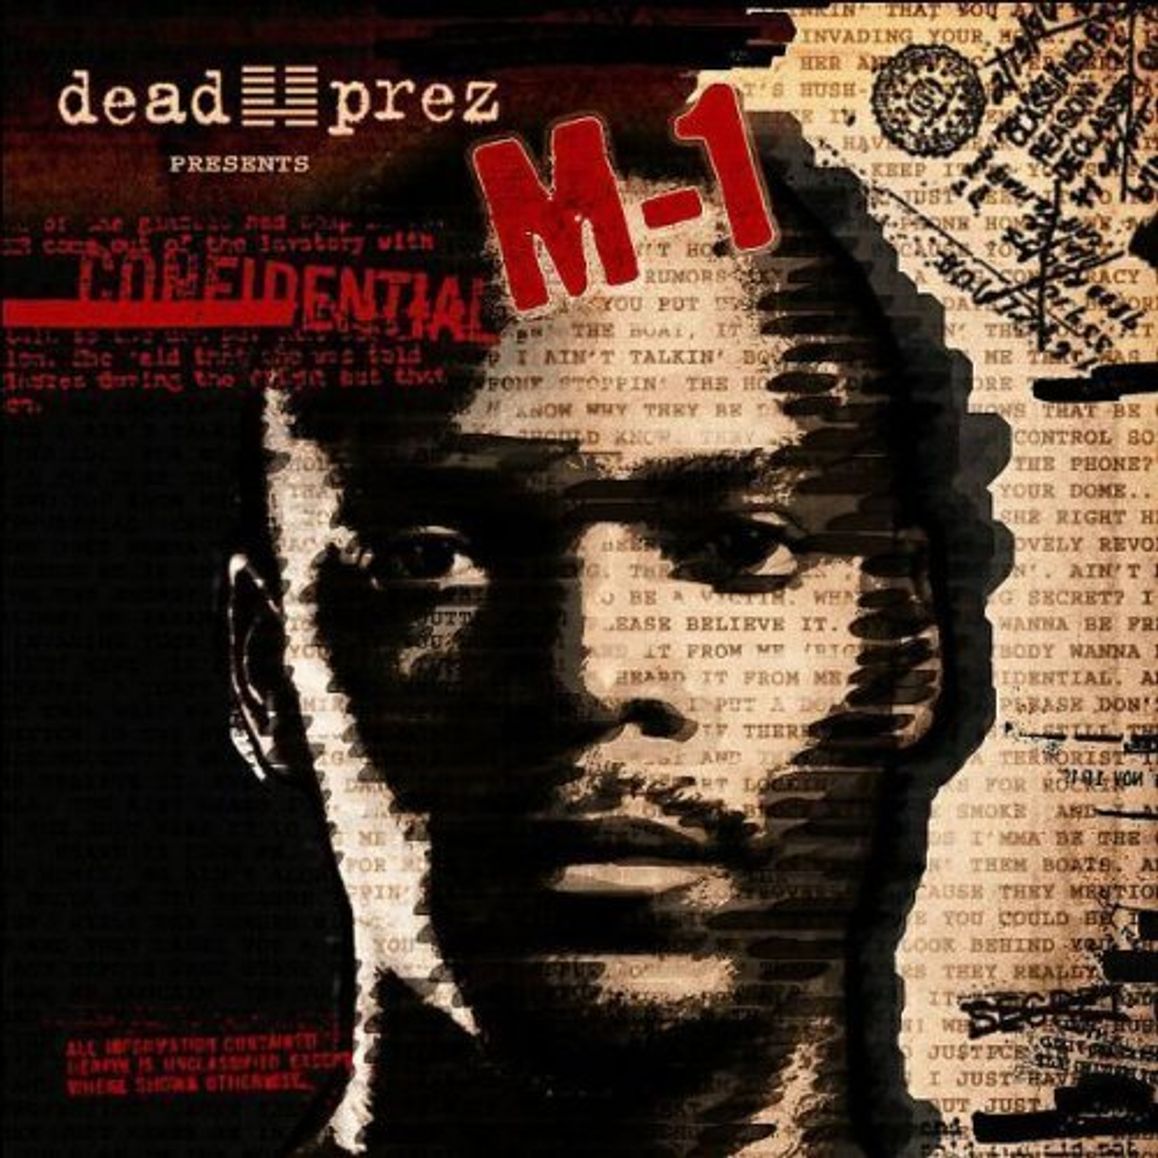 March 21, 2006 @M1deadprez released Confidential Some Production Includes @FabrizioSotti @BlackJeruz @LTMOE and more Some Features Include @stylesp @QtipTheAbstract @GhostfaceKillah and more